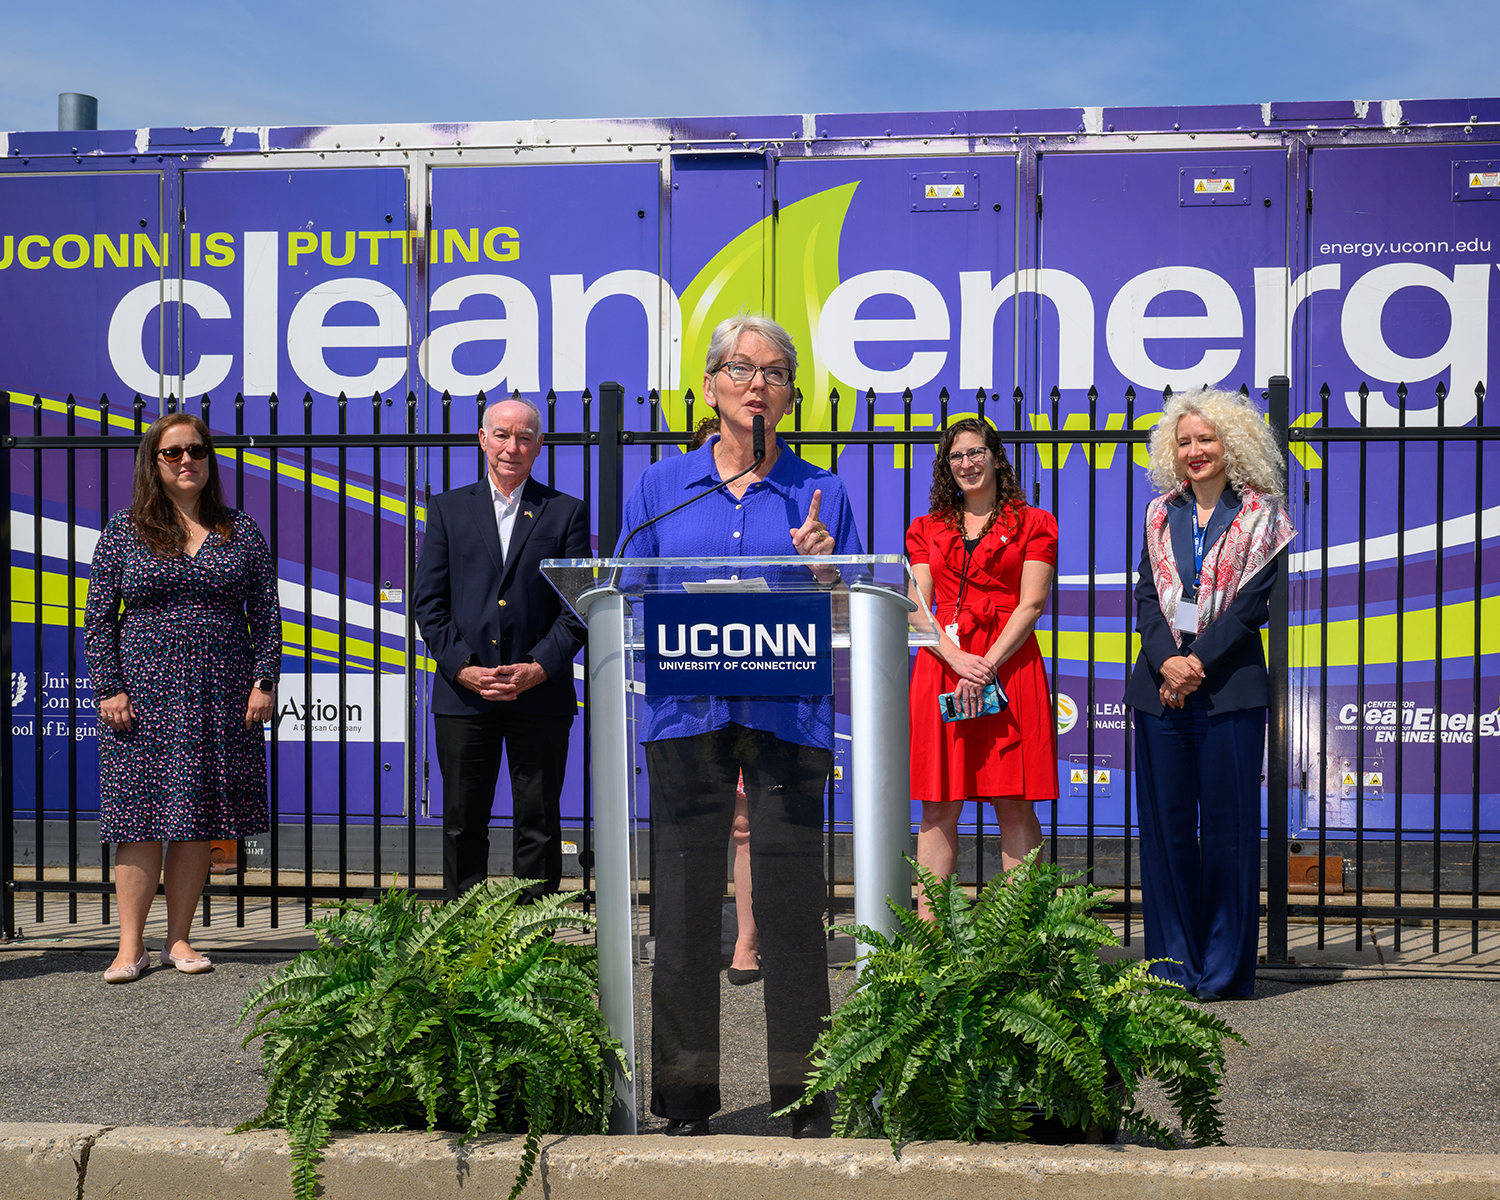 U.S. Secretary of Energy Jennifer Granholm speaks into a microphone at a clear podium with her left index finger pointing upward during a press conference at the Center for Clean Energy Engineering on May 20, 2022. Behind Granholm, four people look on, smiling, including U.S. Rep Joe Courtney and University President Radenka Maric. Behind them is a graphic on a fuel cell that says "UConn is putting clean energy to work."